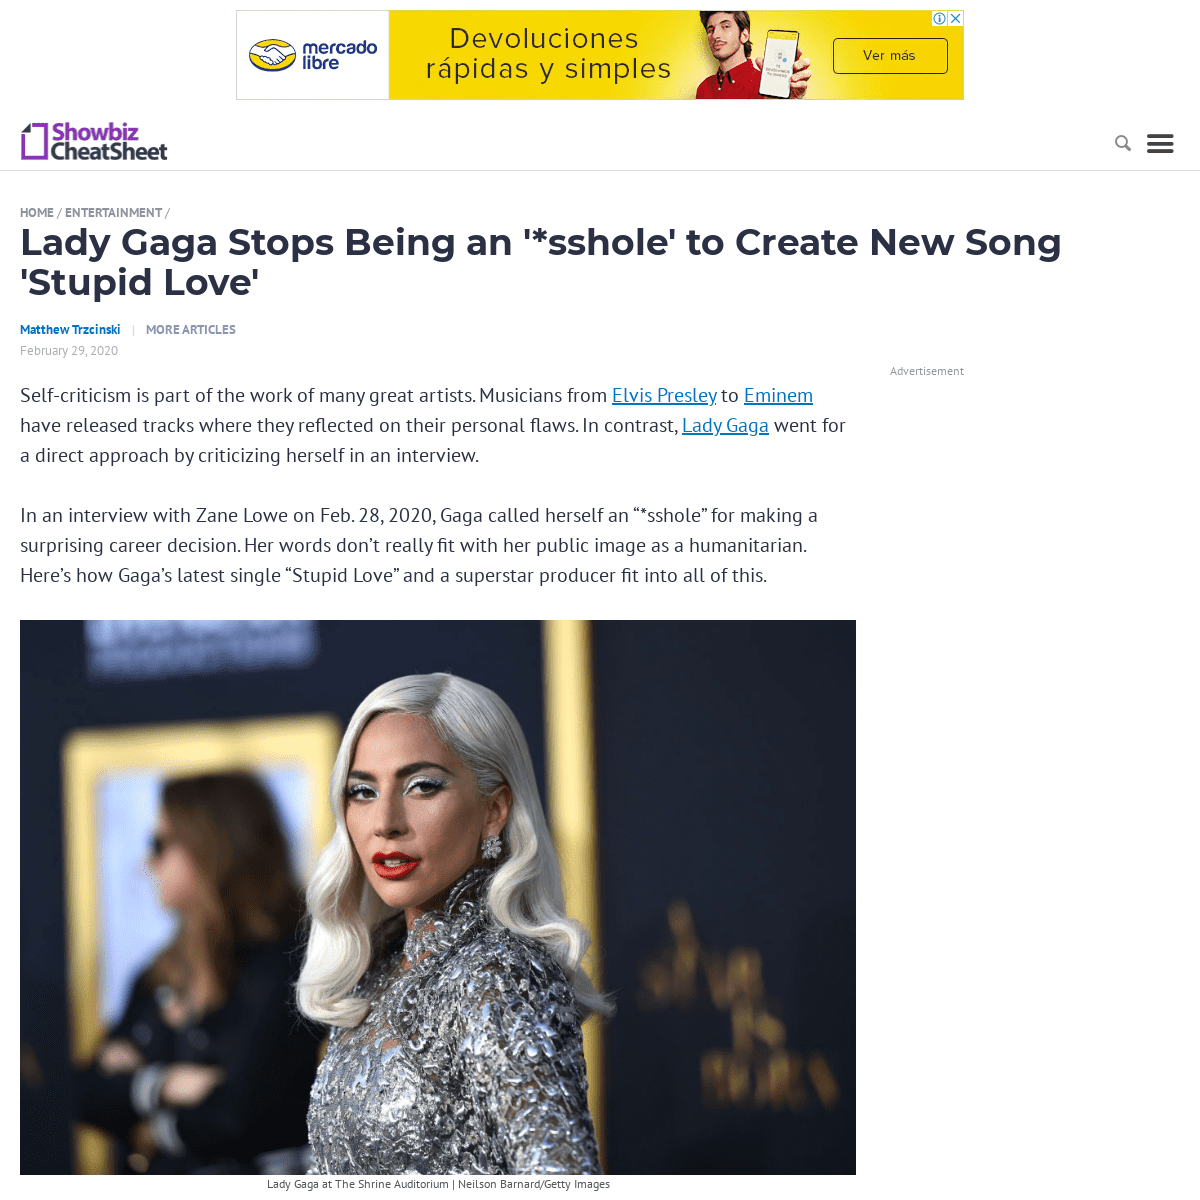 A complete backup of www.cheatsheet.com/entertainment/lady-gaga-stops-being-an-sshole-to-create-new-song-stupid-love.html/